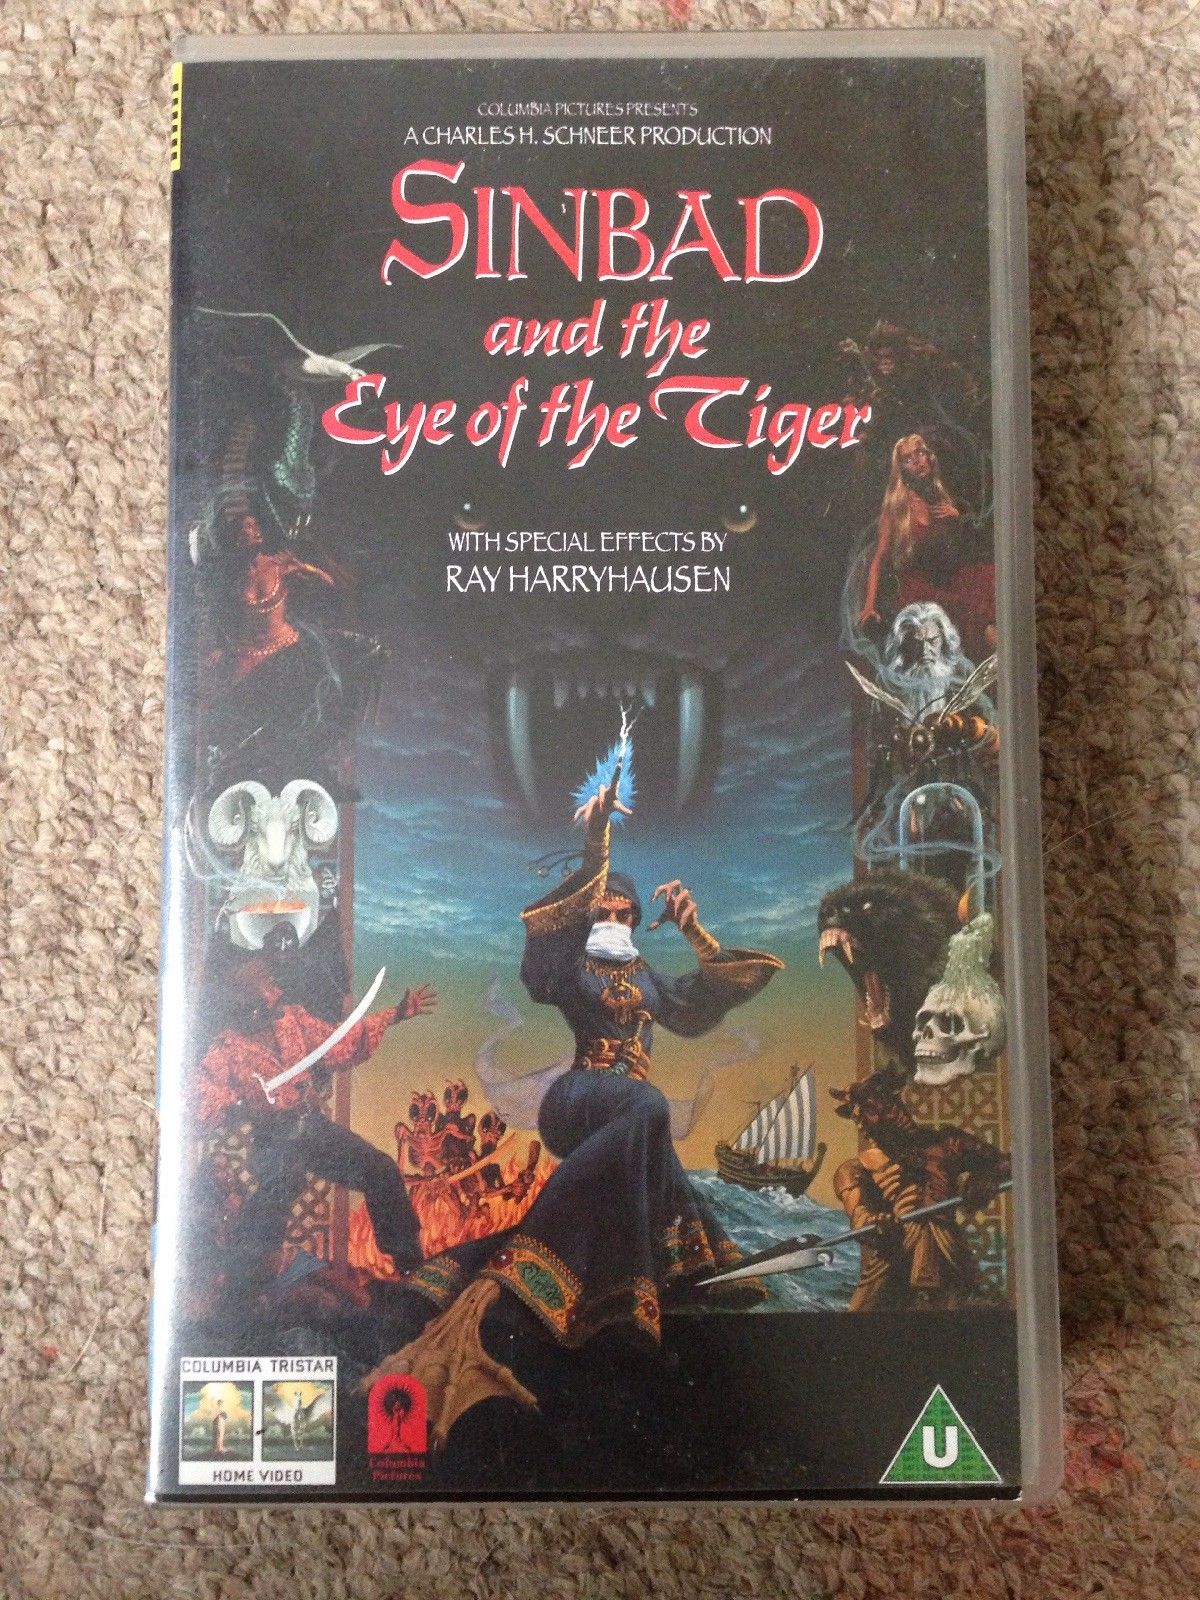 Sinbad and the Eye of the Tiger | Video Collection International